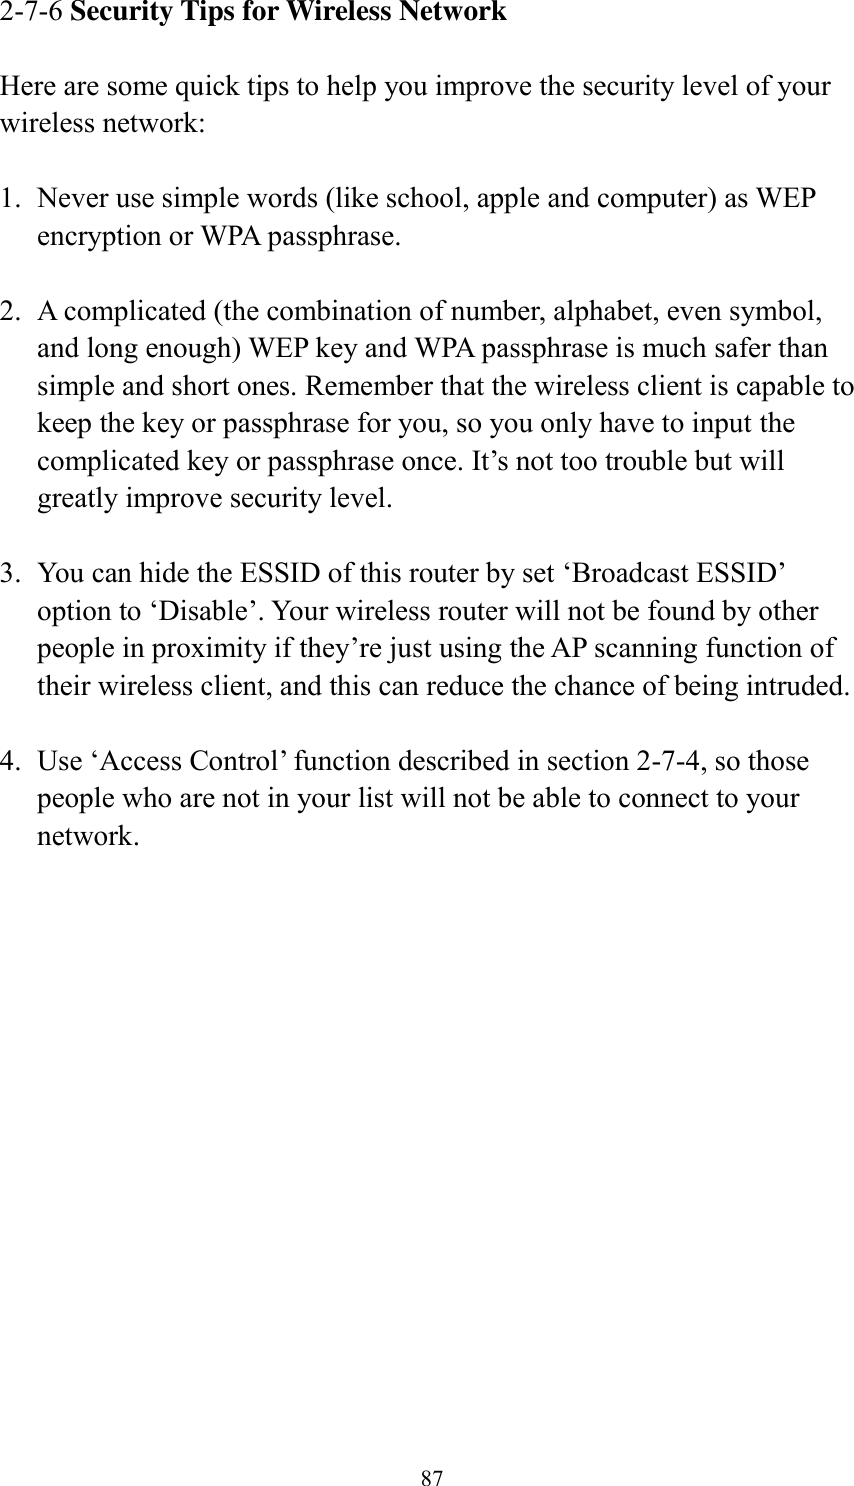 87 2-7-6 Security Tips for Wireless Network  Here are some quick tips to help you improve the security level of your wireless network:  1. Never use simple words (like school, apple and computer) as WEP encryption or WPA passphrase.  2. A complicated (the combination of number, alphabet, even symbol, and long enough) WEP key and WPA passphrase is much safer than simple and short ones. Remember that the wireless client is capable to keep the key or passphrase for you, so you only have to input the complicated key or passphrase once. It’s not too trouble but will greatly improve security level.  3. You can hide the ESSID of this router by set ‘Broadcast ESSID’ option to ‘Disable’. Your wireless router will not be found by other people in proximity if they’re just using the AP scanning function of their wireless client, and this can reduce the chance of being intruded.  4. Use ‘Access Control’ function described in section 2-7-4, so those people who are not in your list will not be able to connect to your network. 